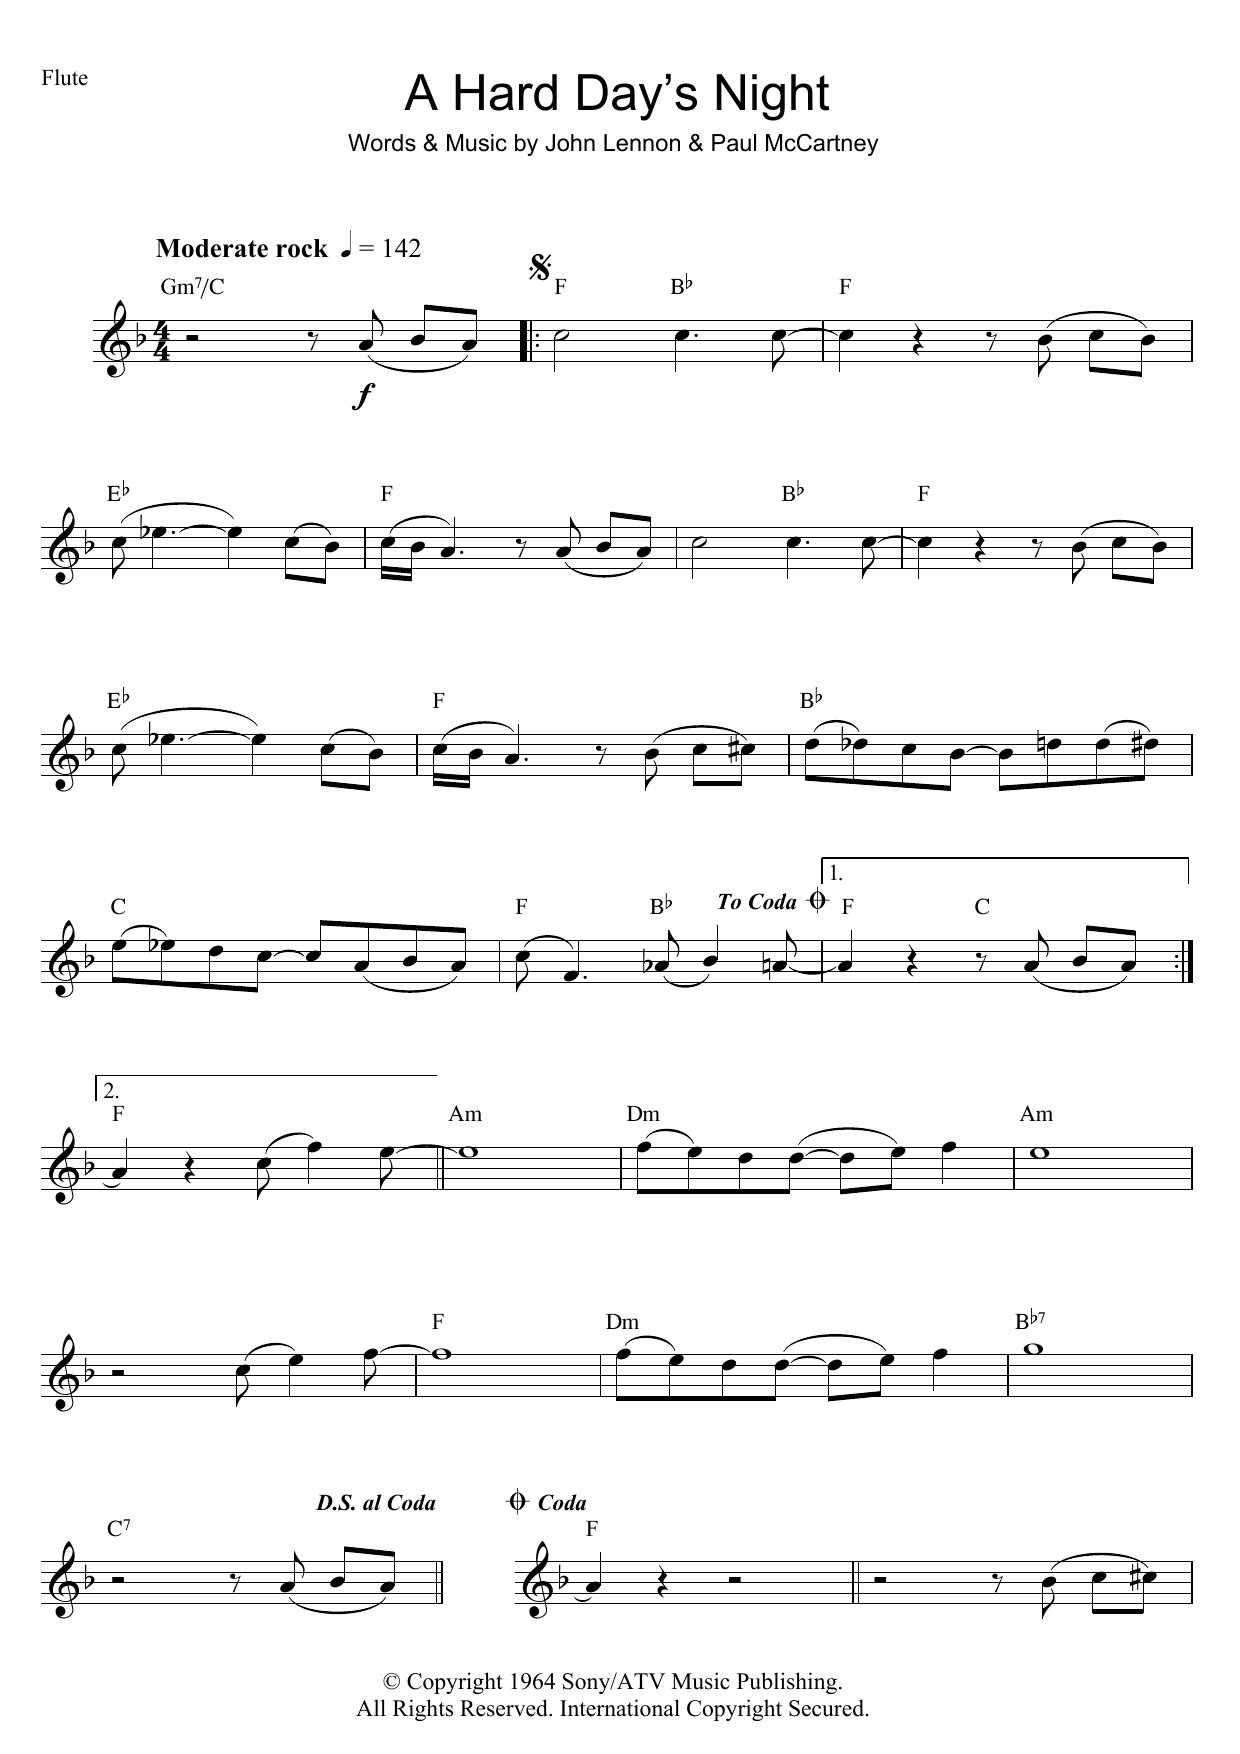 Download The Beatles A Hard Day's Night Sheet Music